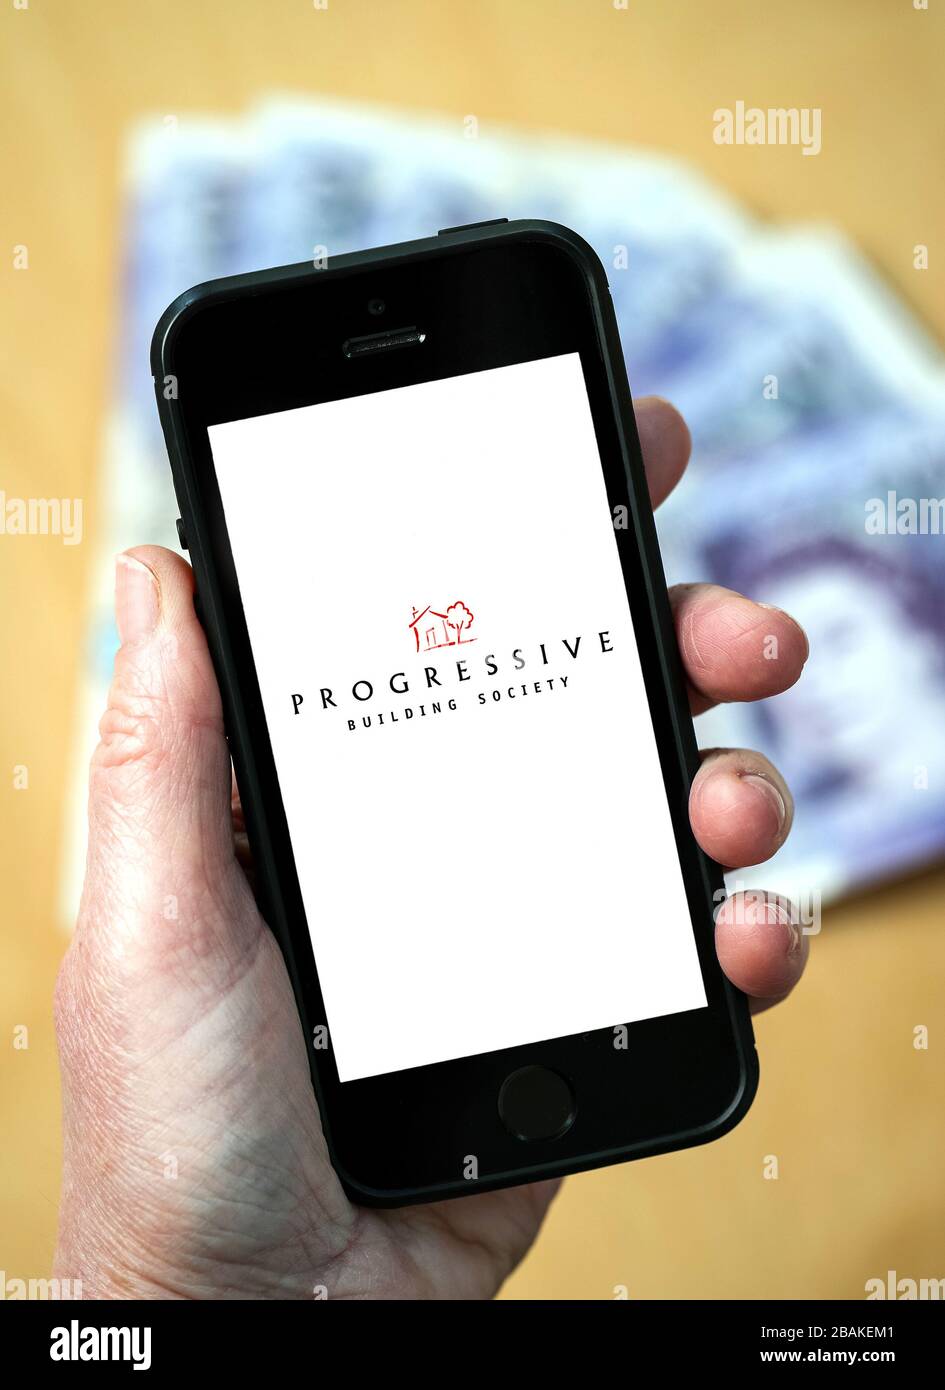 A woman holding a mobile phone showing Progressive Building Society (editorial use only) Stock Photo